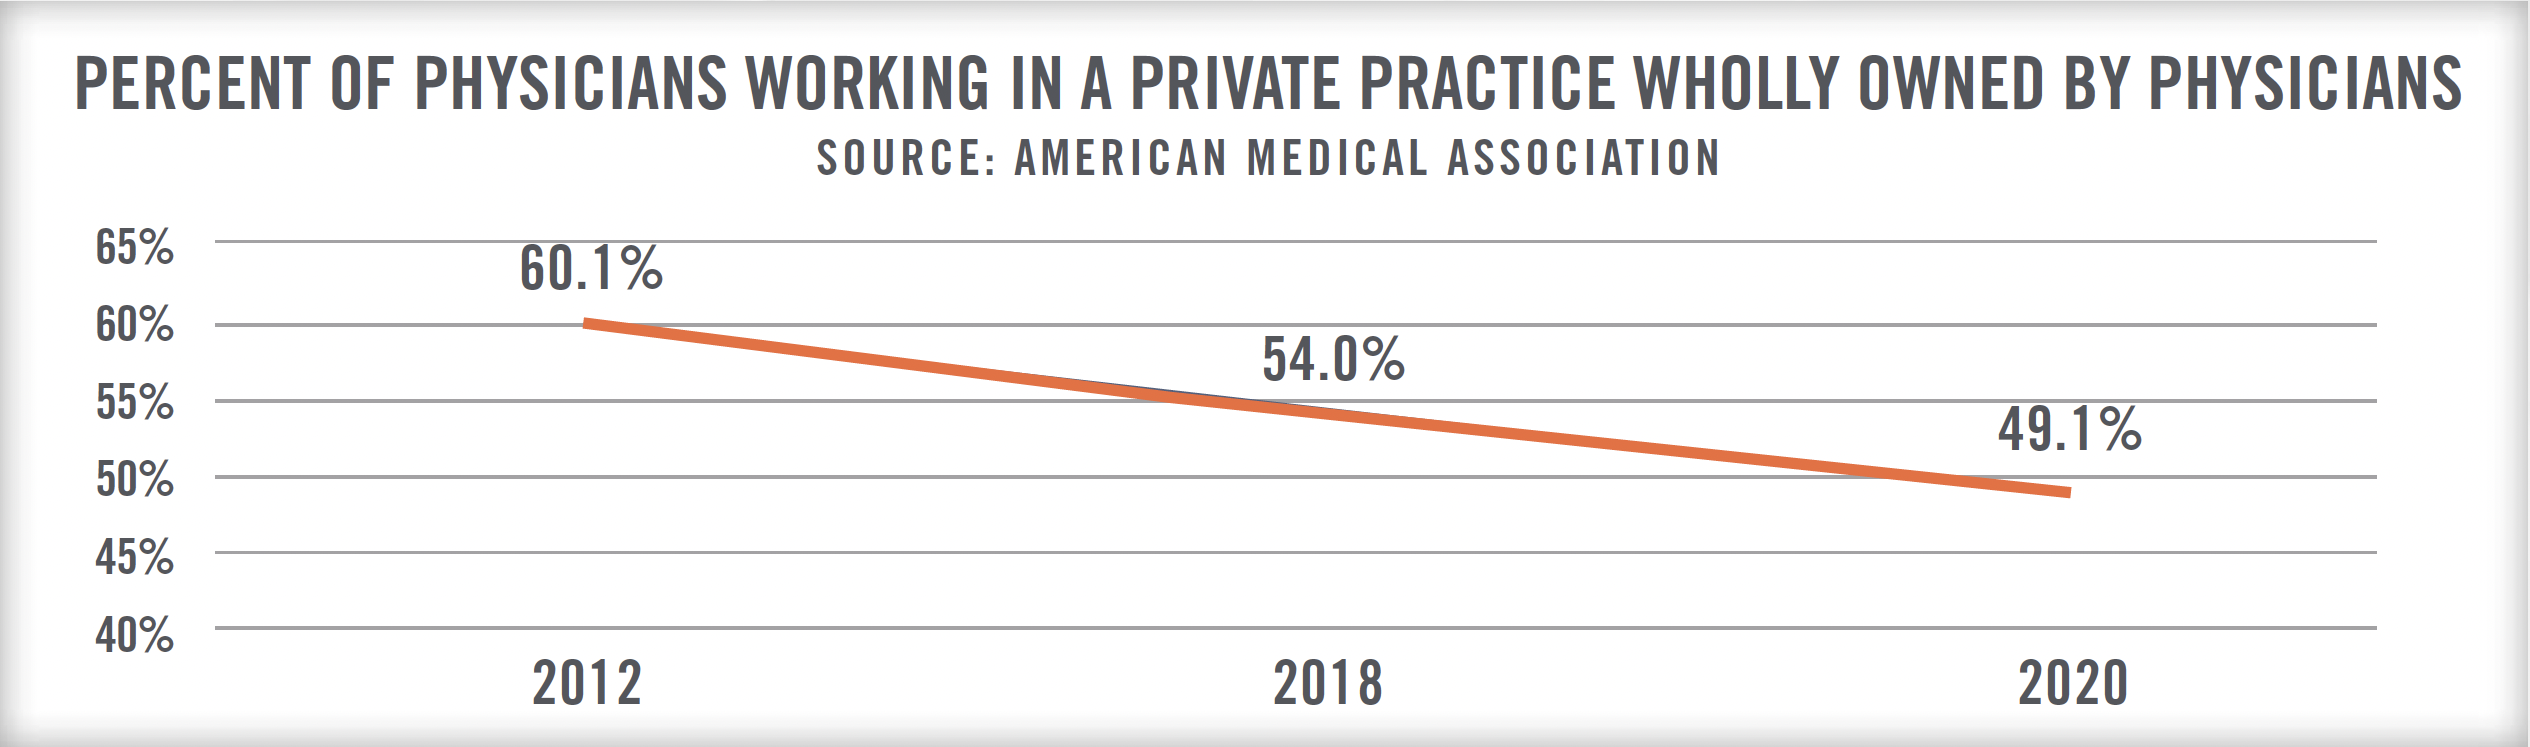 2022 Outlook Physician Practice Industry Fig 2